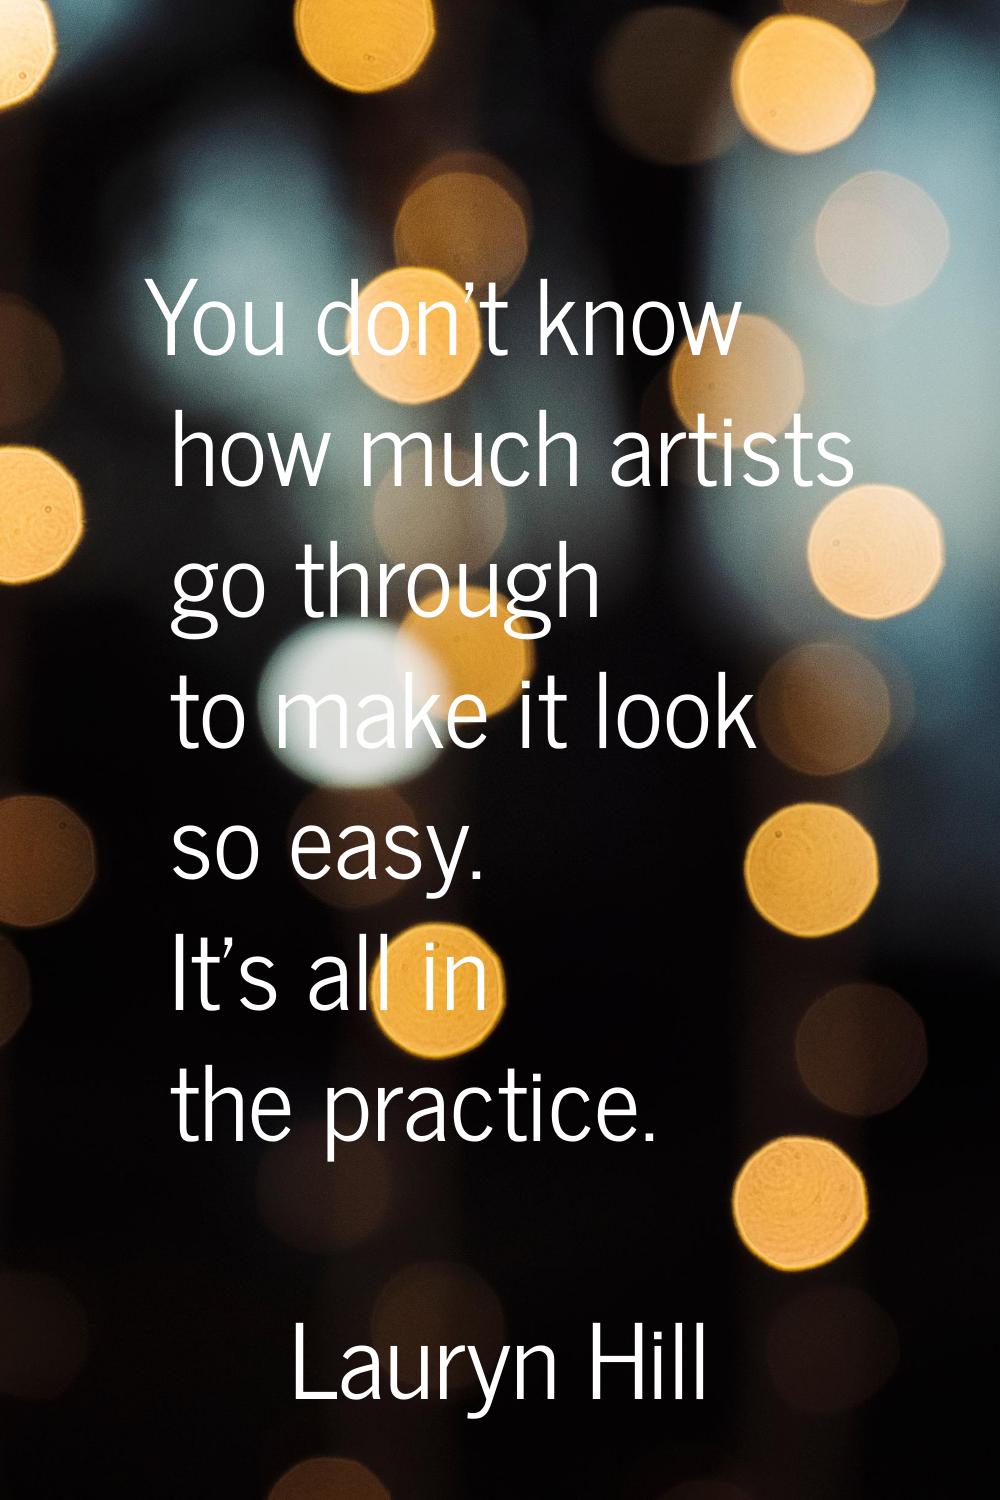 You don't know how much artists go through to make it look so easy. It's all in the practice.